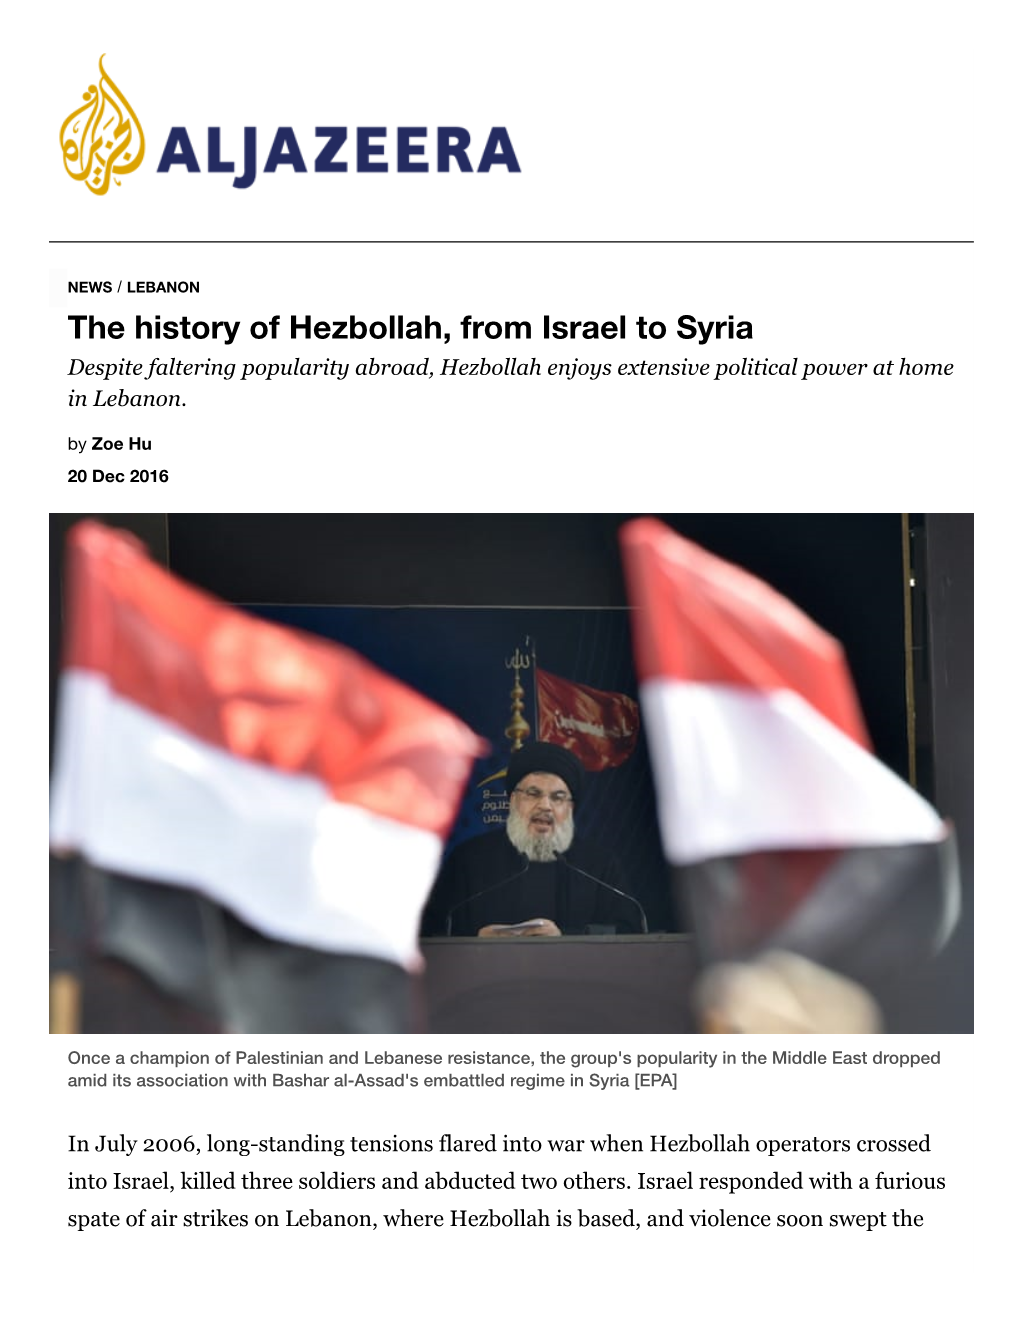 The History of Hezbollah, from Israel to Syria Despite Faltering Popularity Abroad, Hezbollah Enjoys Extensive Political Power at Home in Lebanon